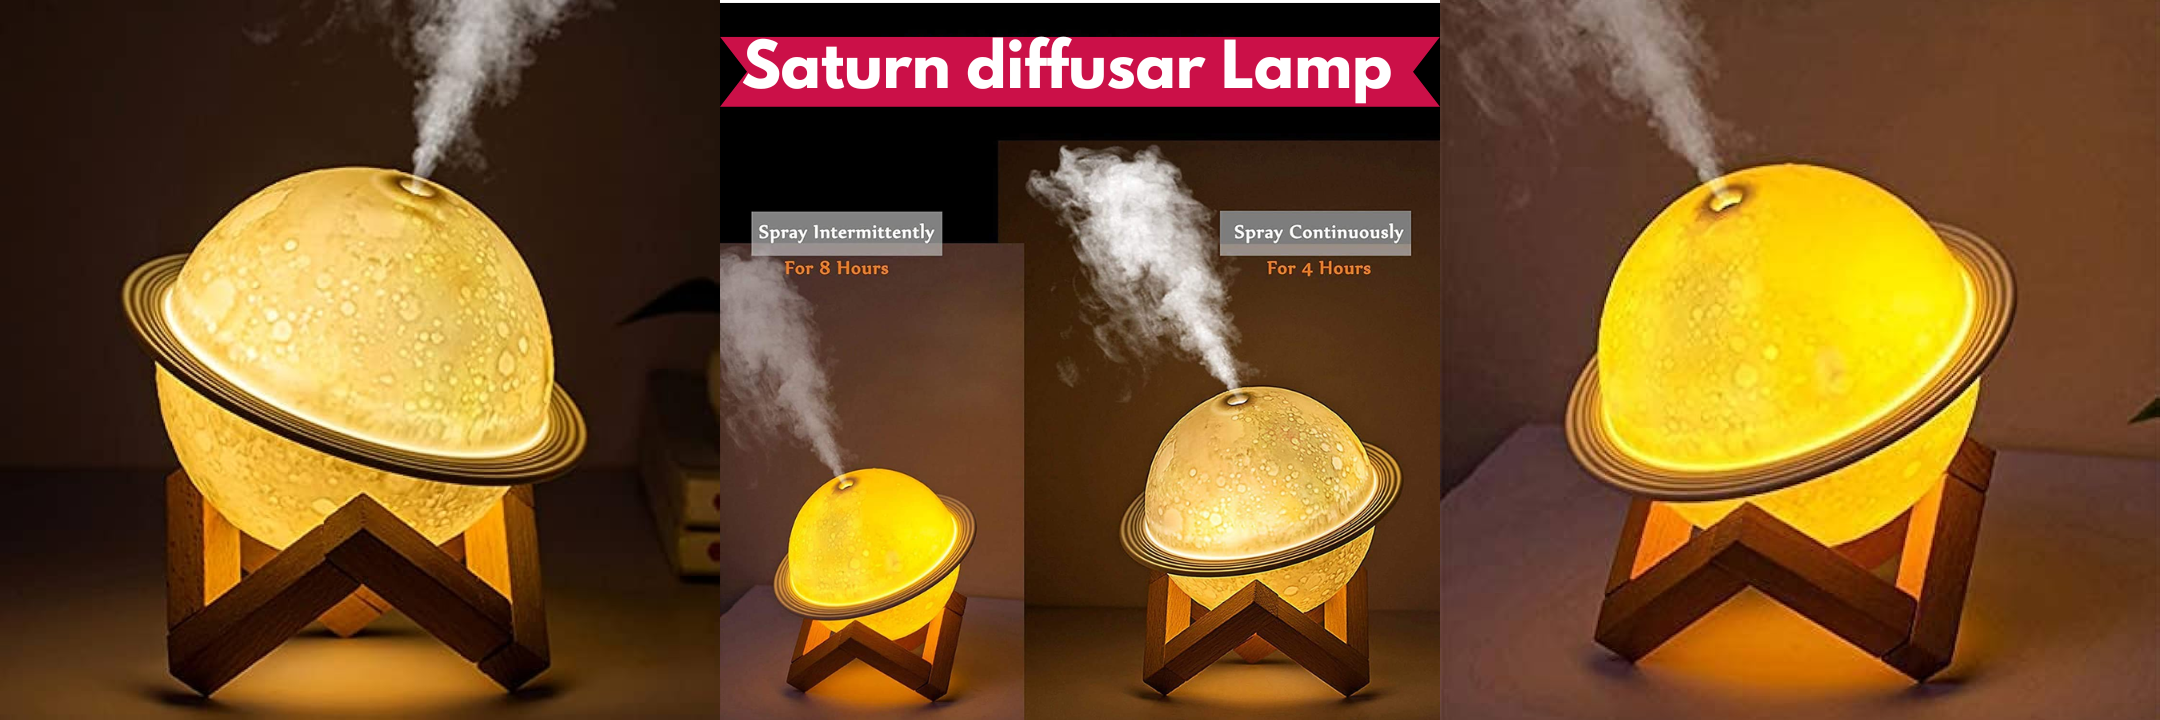 Saturn diffuser lamp is the best diffuser led light